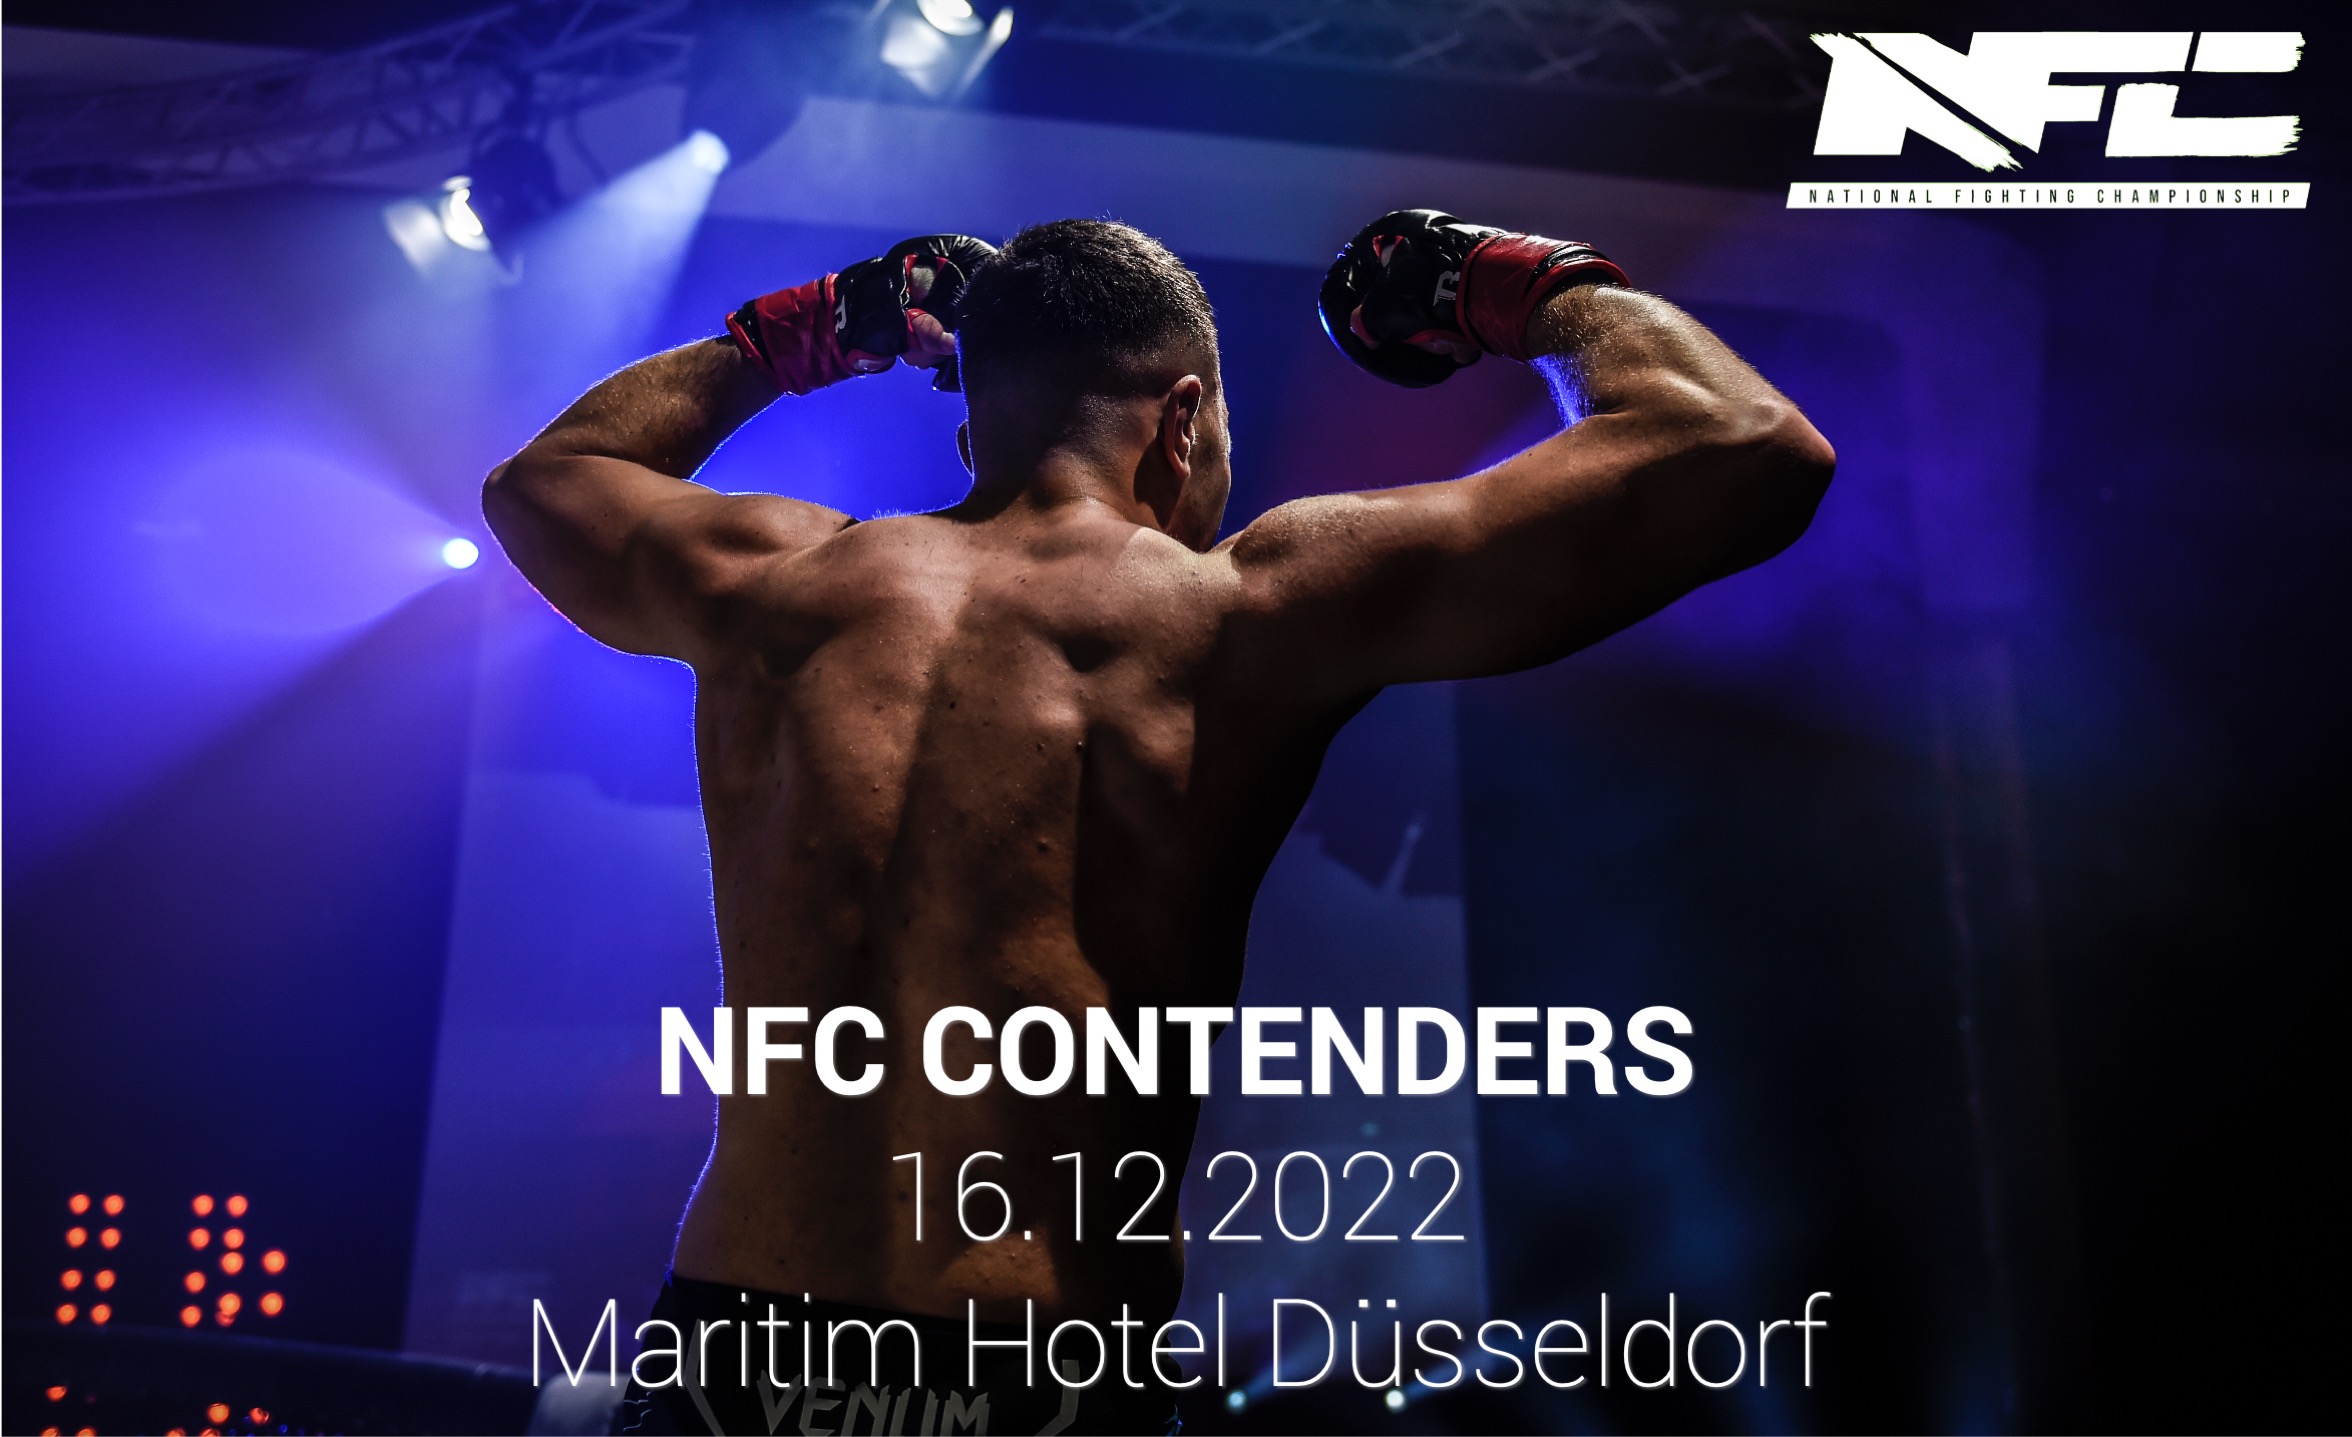 Event-Image for 'National Fighting Championship - NFC Contenders - MMA Event'